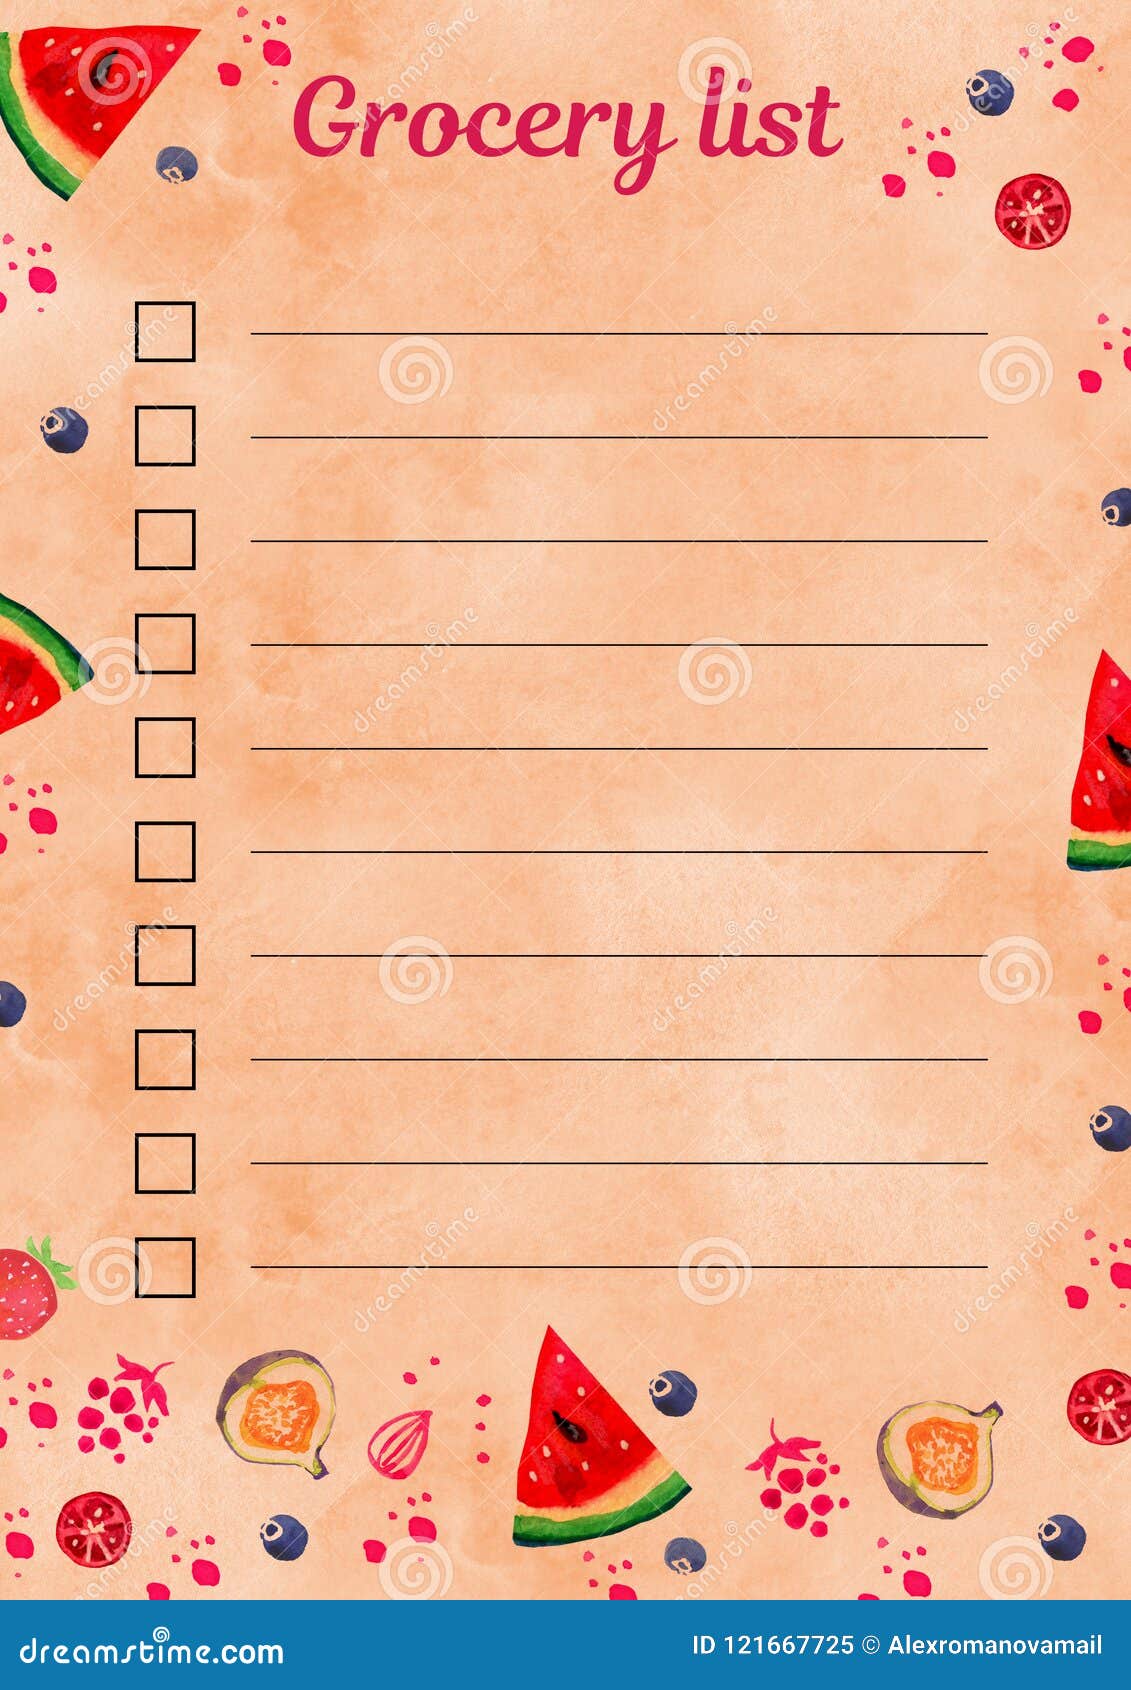 Food List Template from thumbs.dreamstime.com